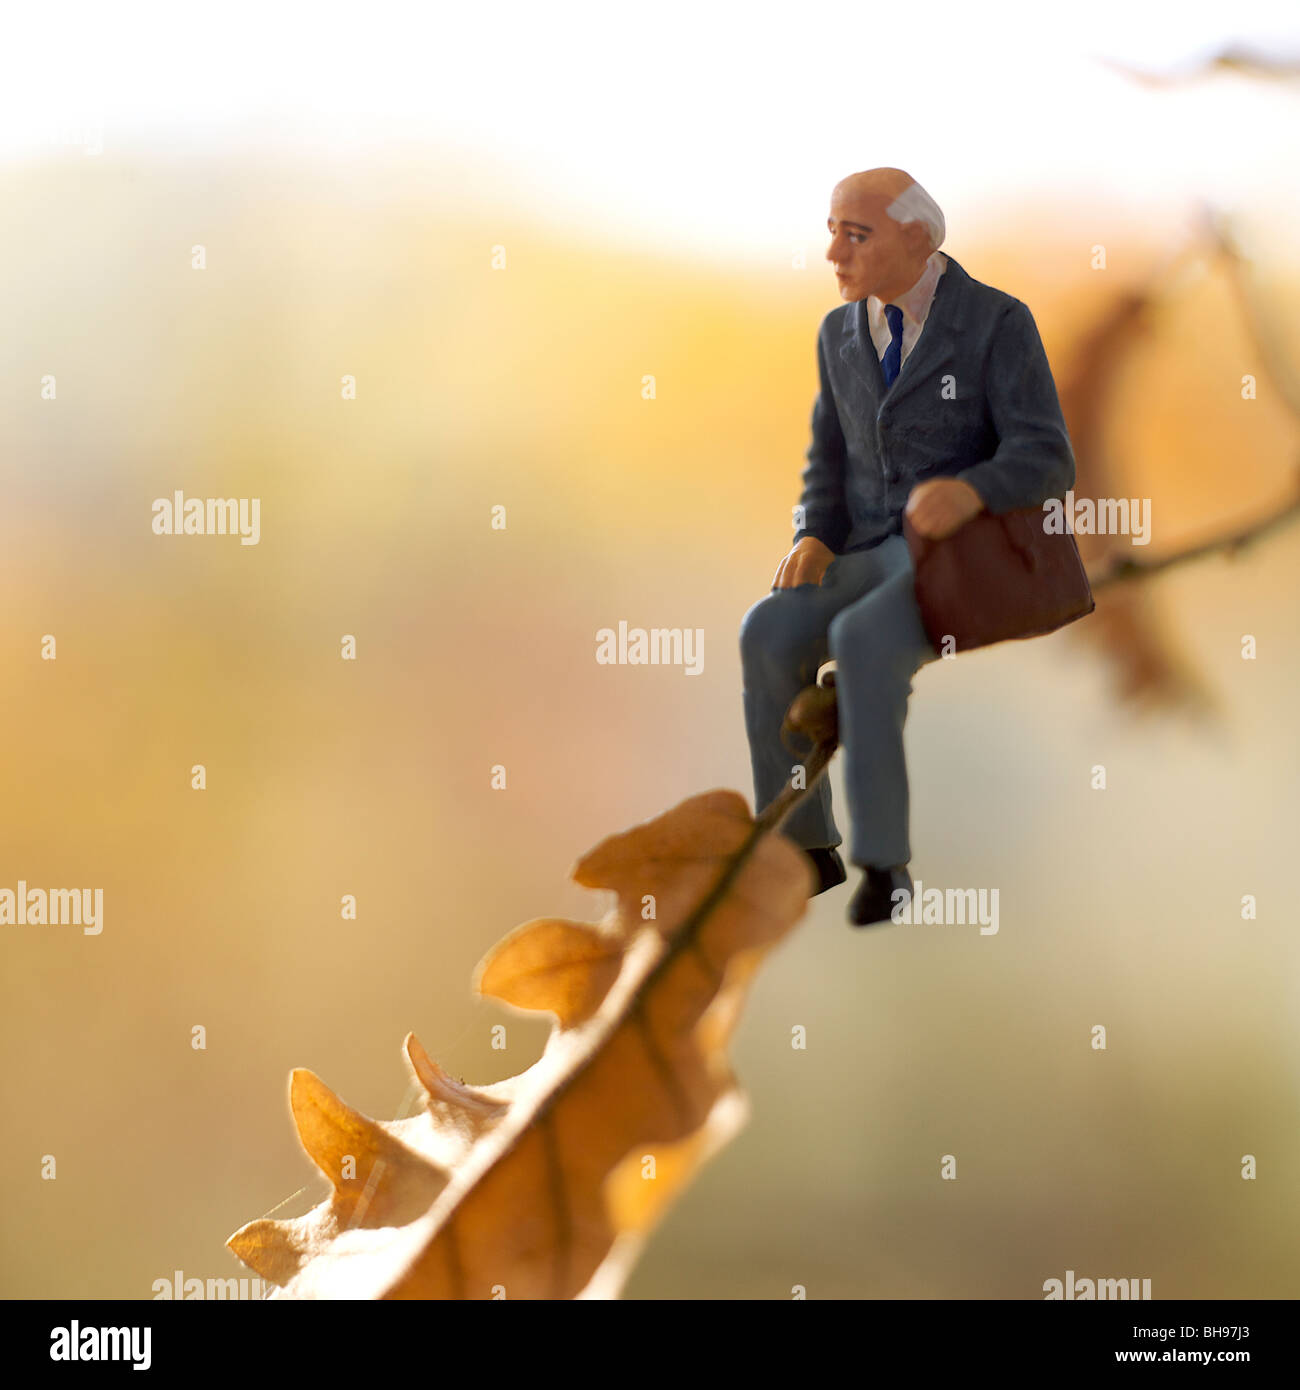 Old man / senior figurine sitting on a branch of tree in autumn Stock Photo